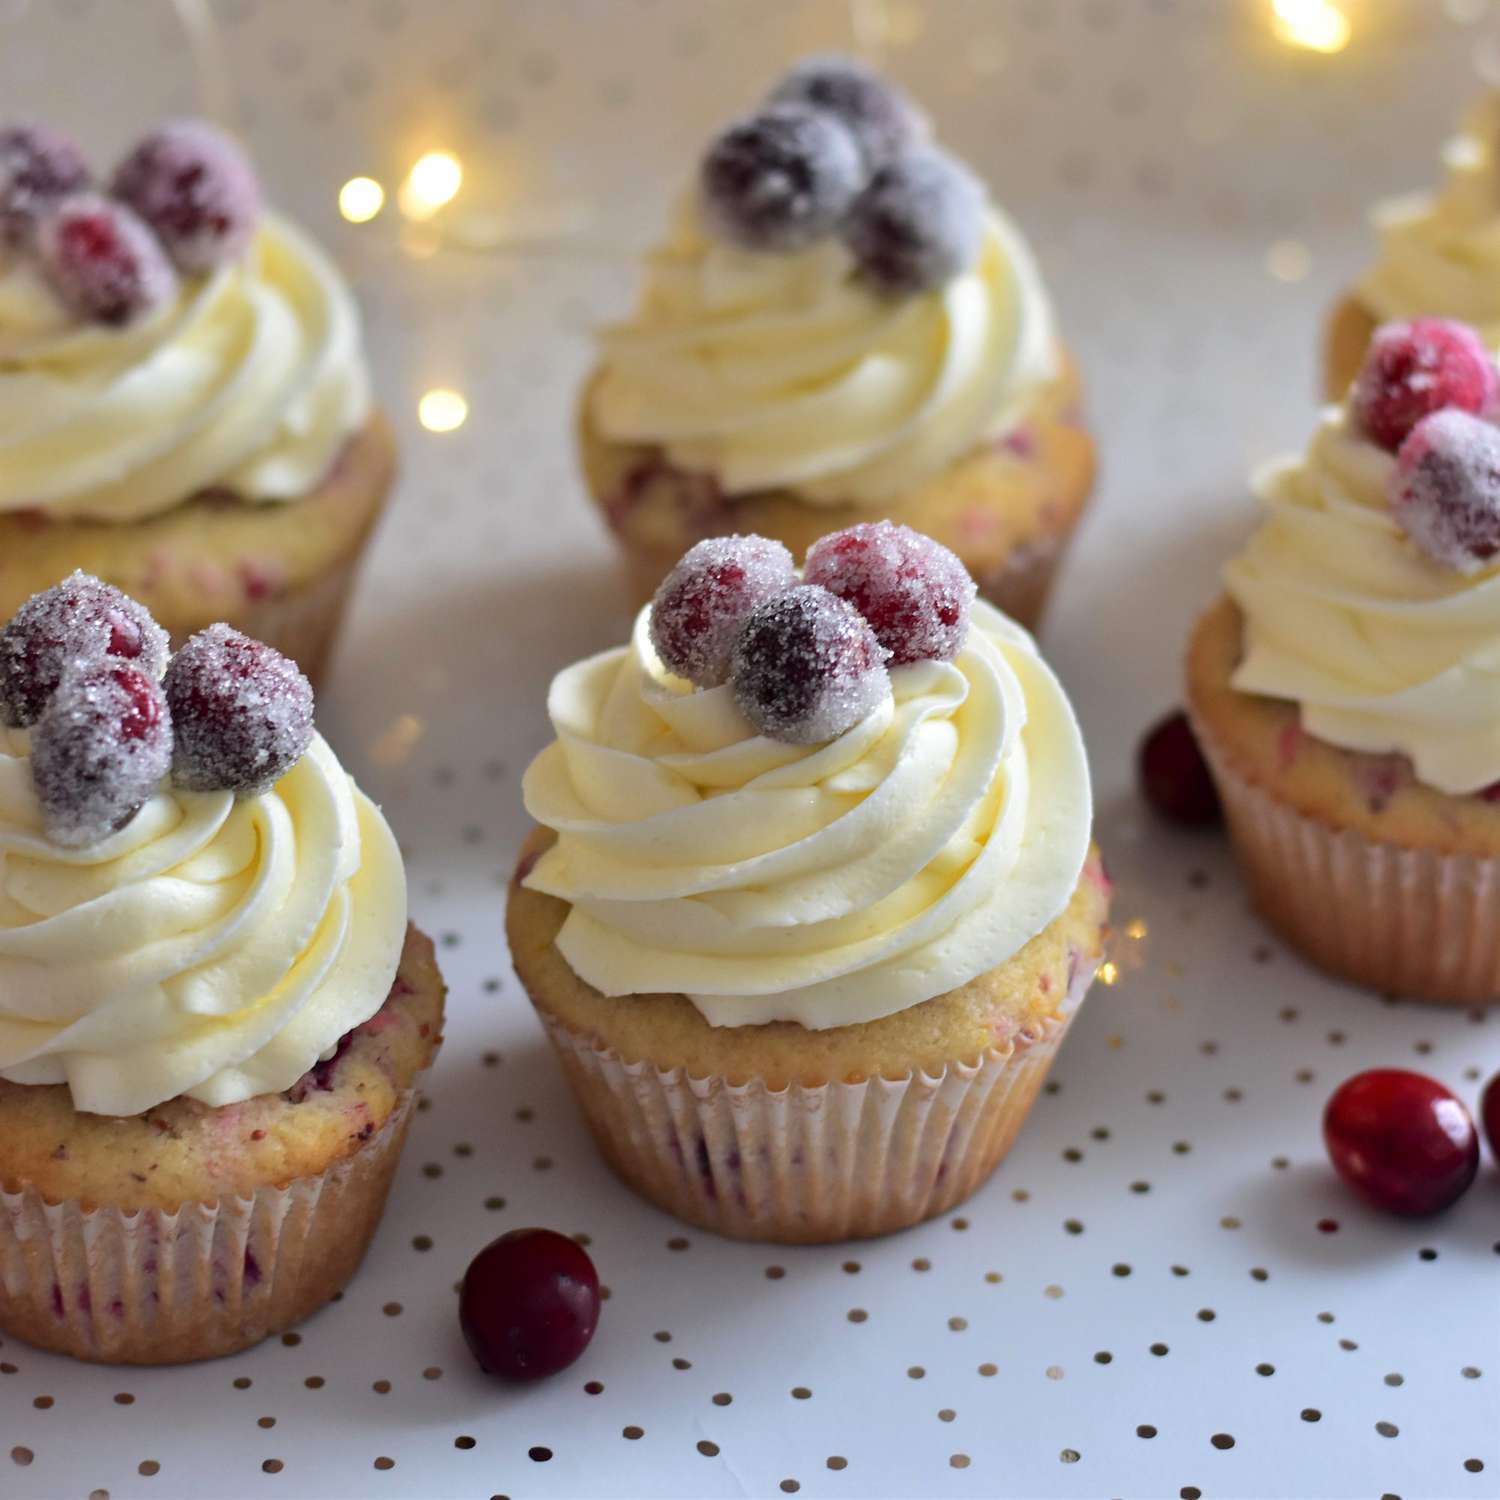 Cranberry Cupcakes with White Chocolate Frosting